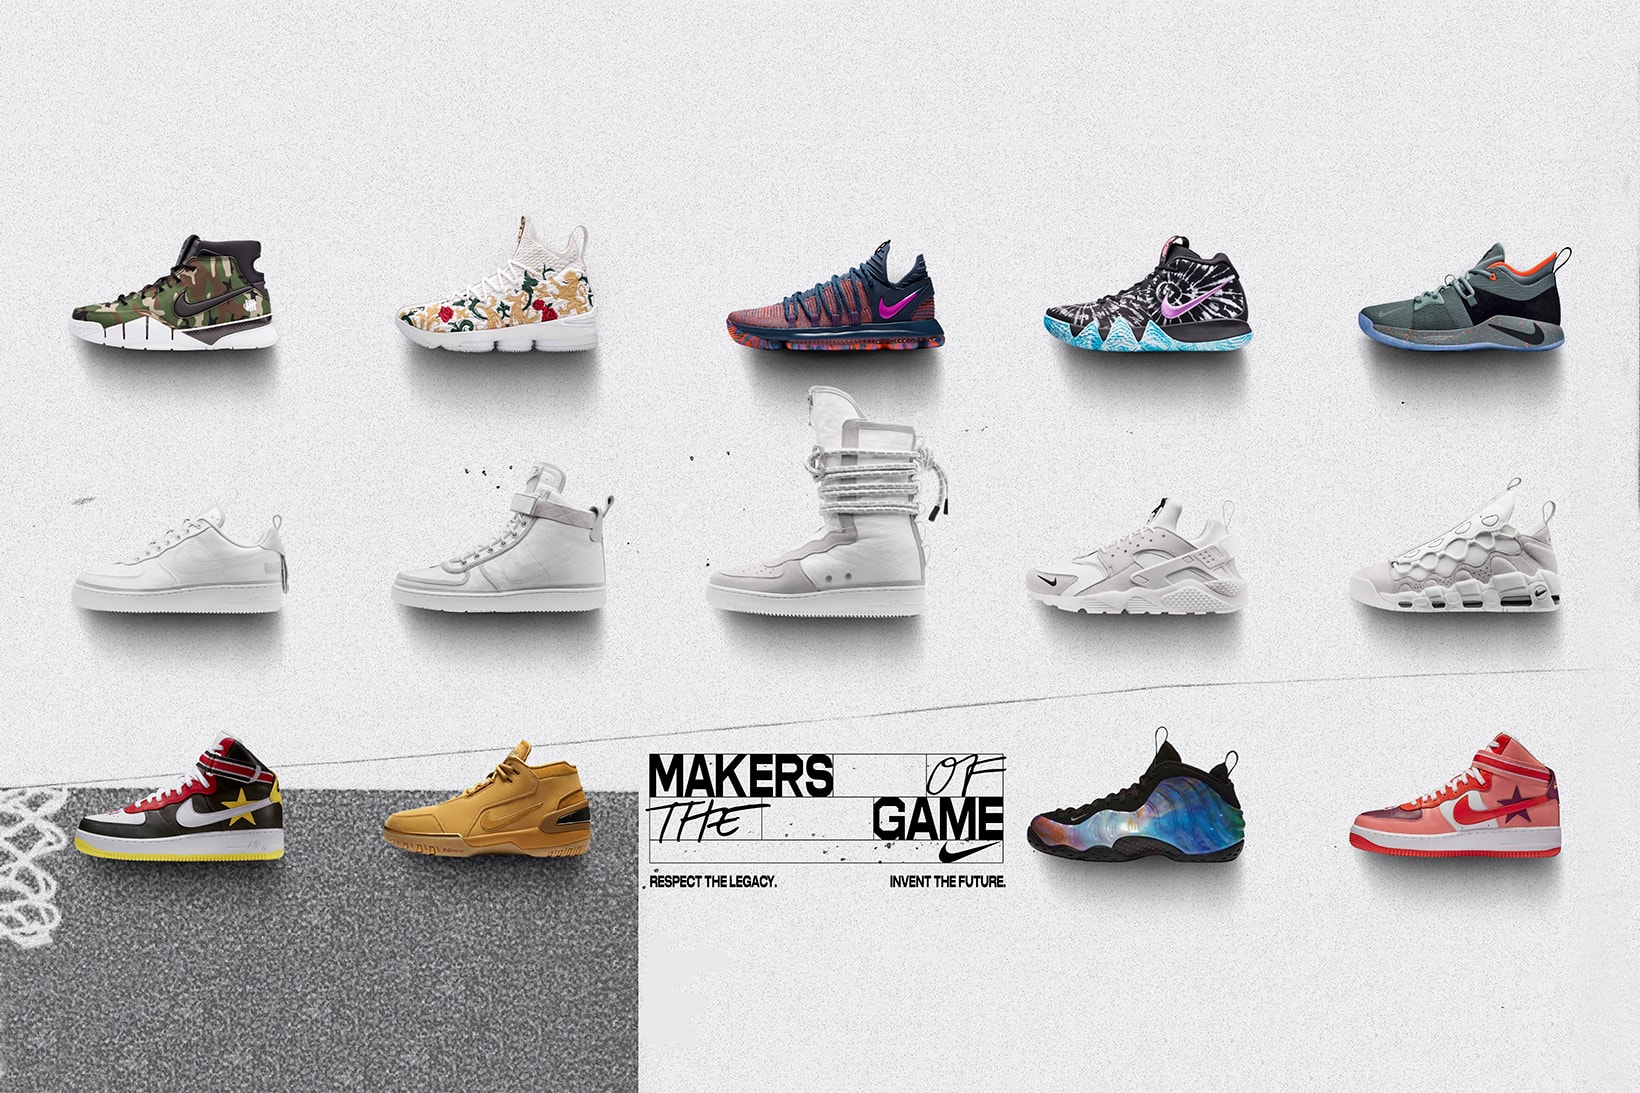 Nike NBA All Star 2018 Makers of the Game Zoom Kobe 1 Air Zoom Generation LeBron 15 KITH UNDEFEATED Air Foamposite One NikeLab Riccardo Tisci Air Force 1 Low Huarache Vandal Hi Supreme Air More Money SF AF1 Hi